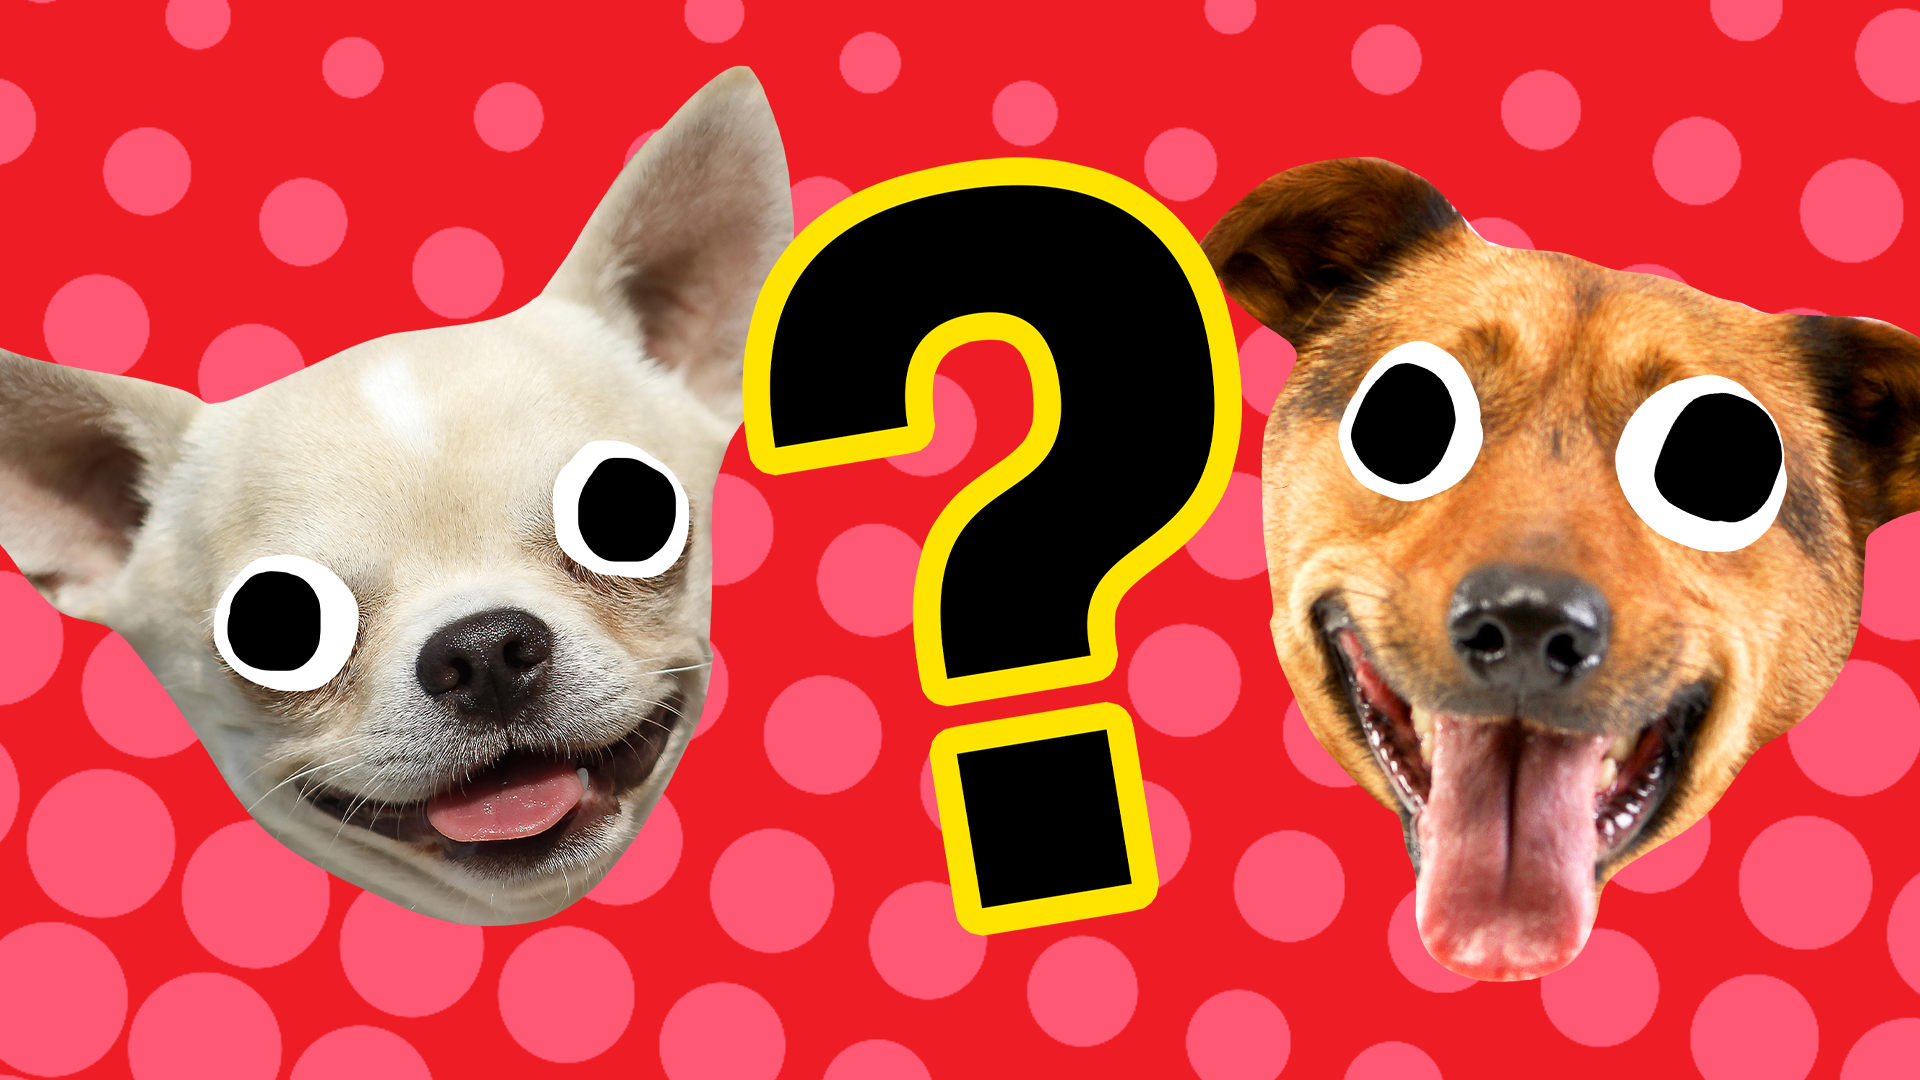 Two dog head and question mark on red background